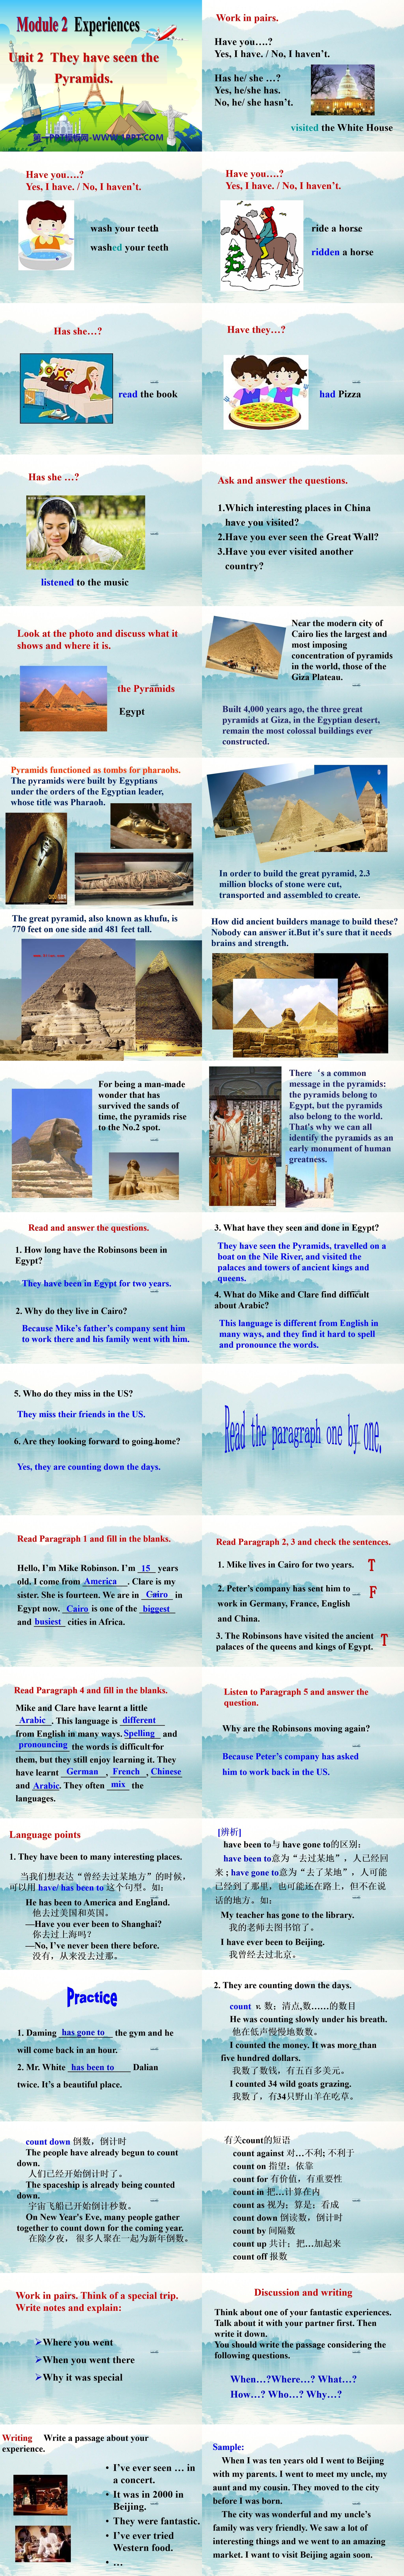 《They have seen the Pyramids》Experiences PPT课件
（2）